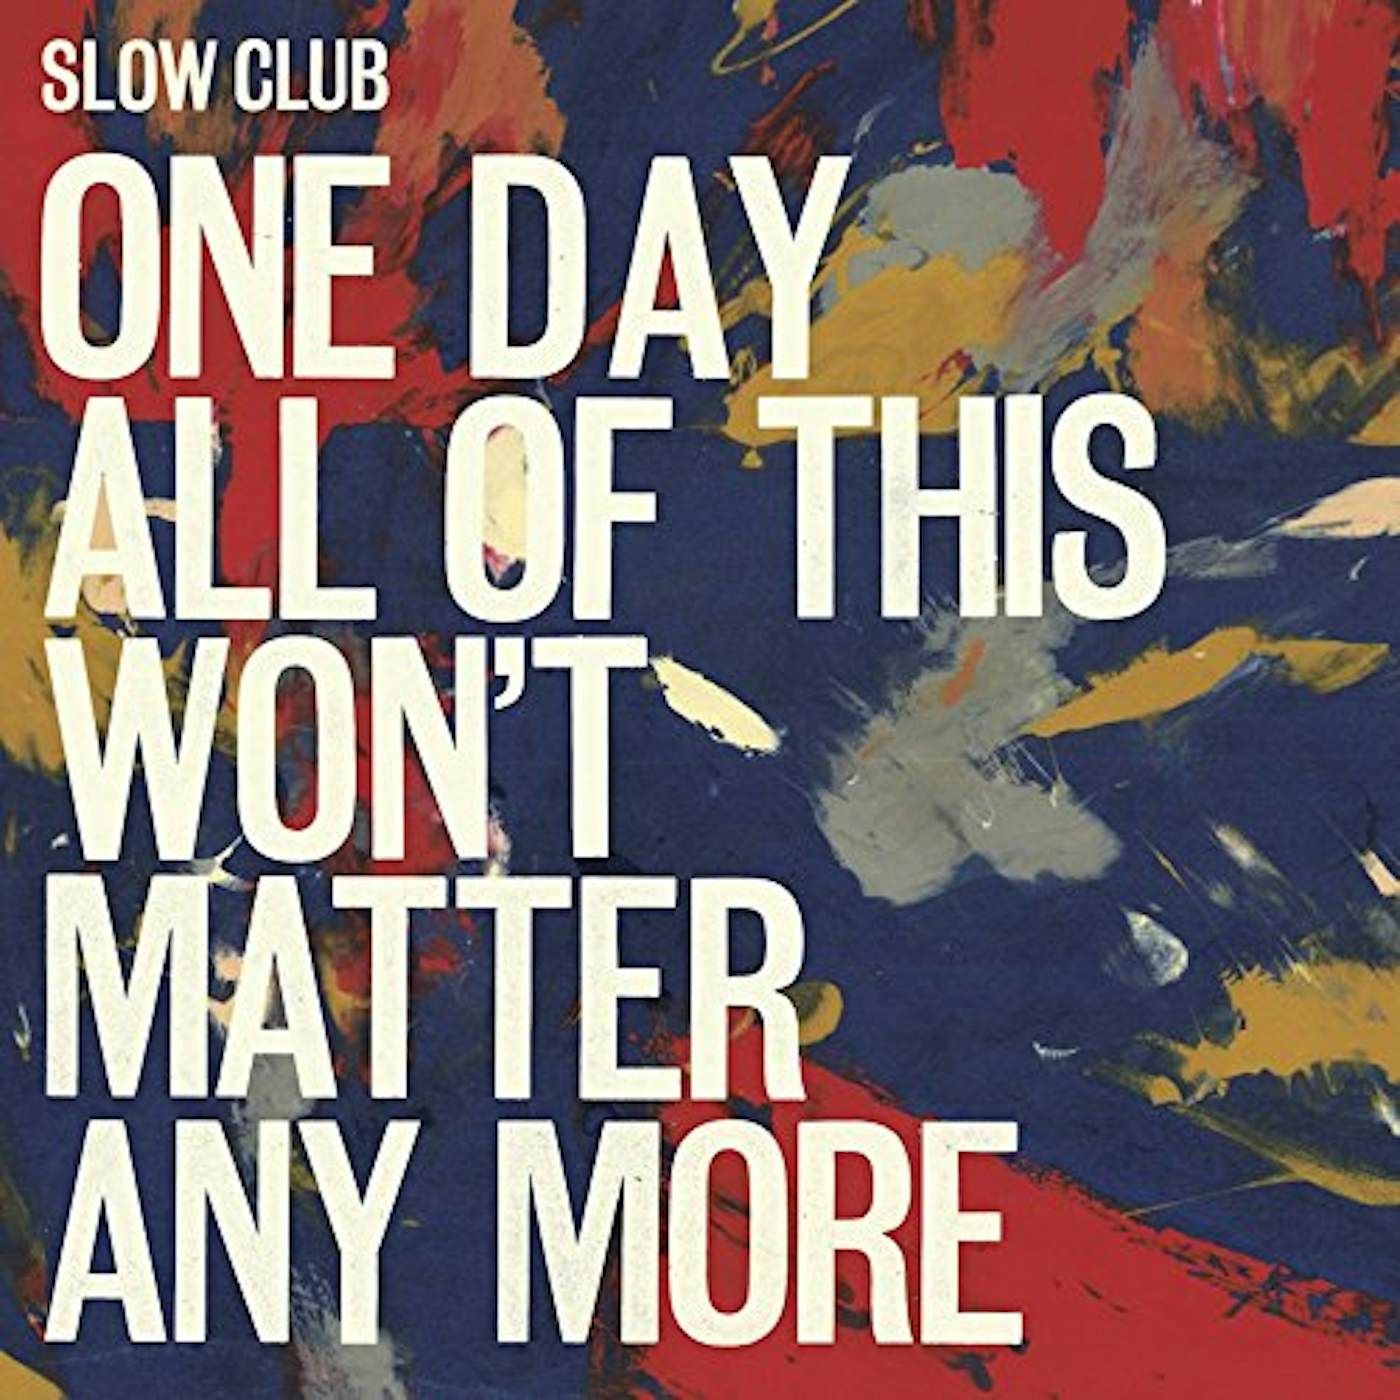 Slow Club One Day All of This Won't Matter Any More Vinyl Record